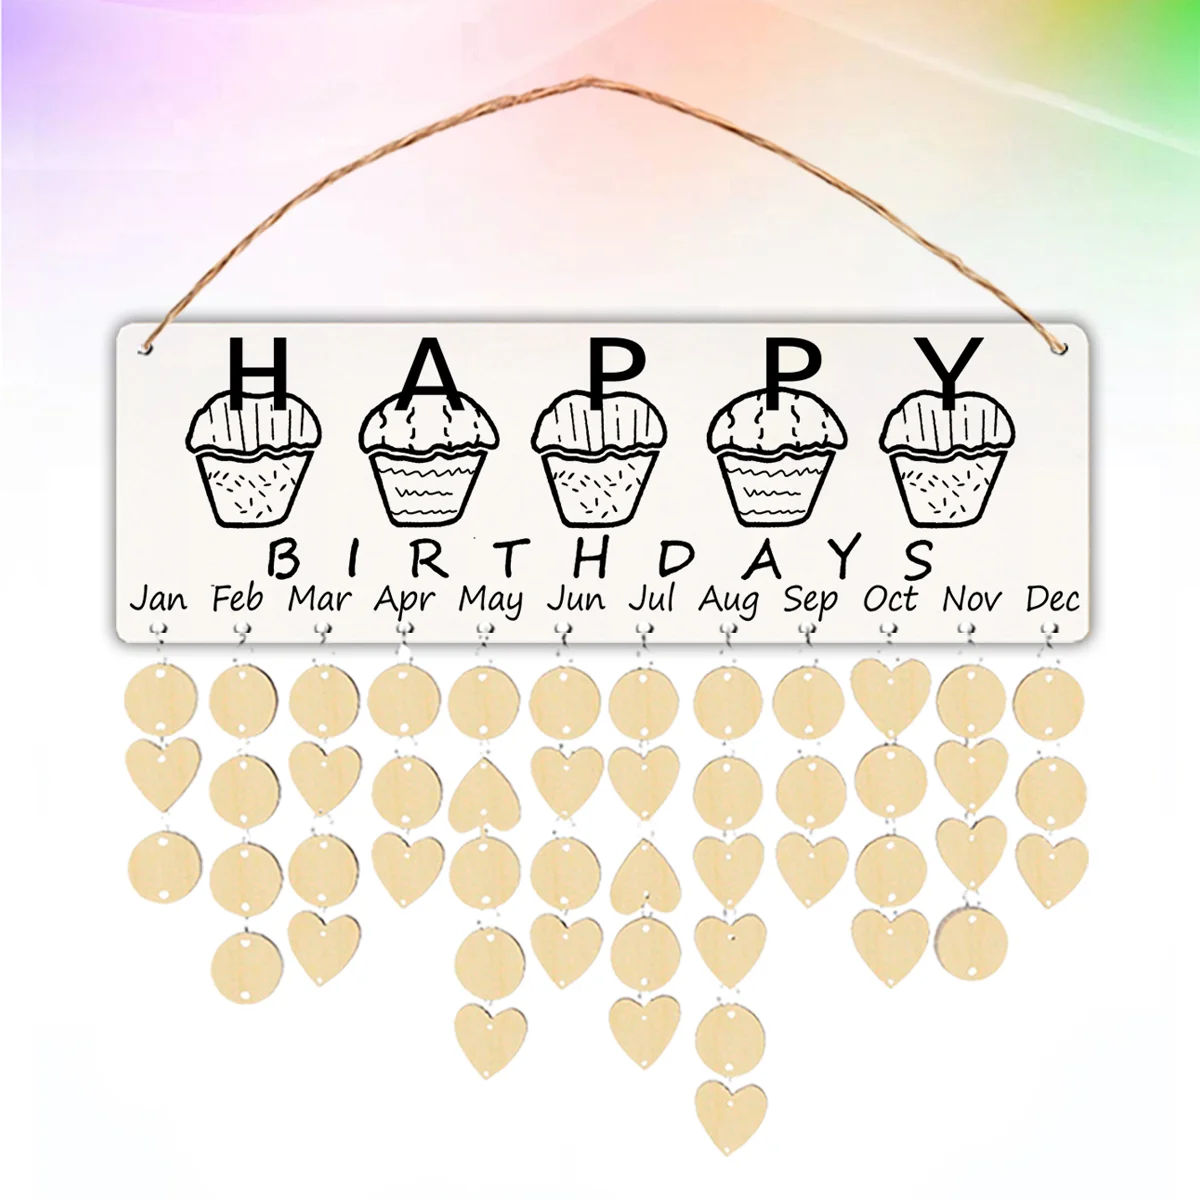 Wooden Birthday Reminder Board DIY Dates Reminder Sign Rope Hanging Events Anniversary Celebration Calendar Wall Plaque with